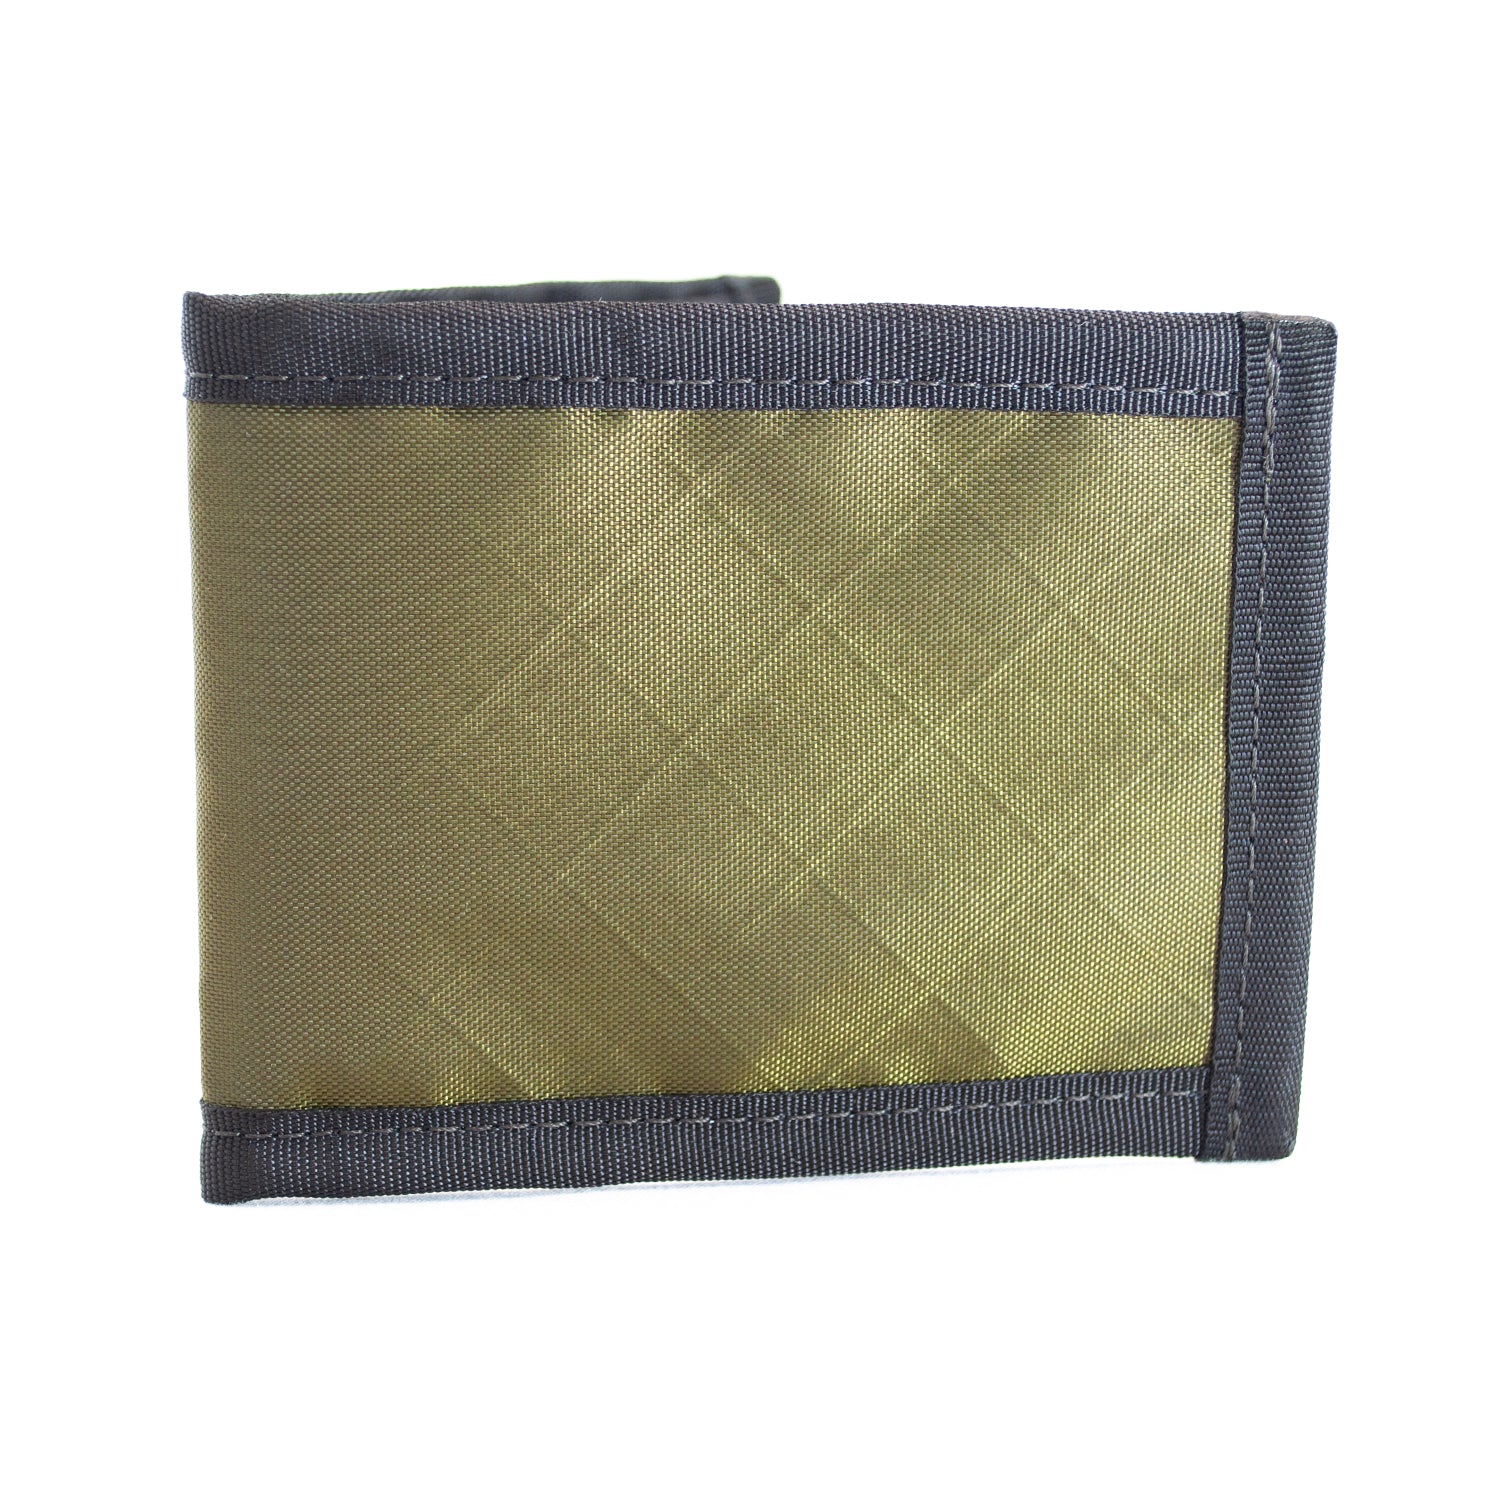 Flowfold Minimalist Slim Vanguard Bifold Wallet Made in USA, Maine by Flowfold  Recycled Olive